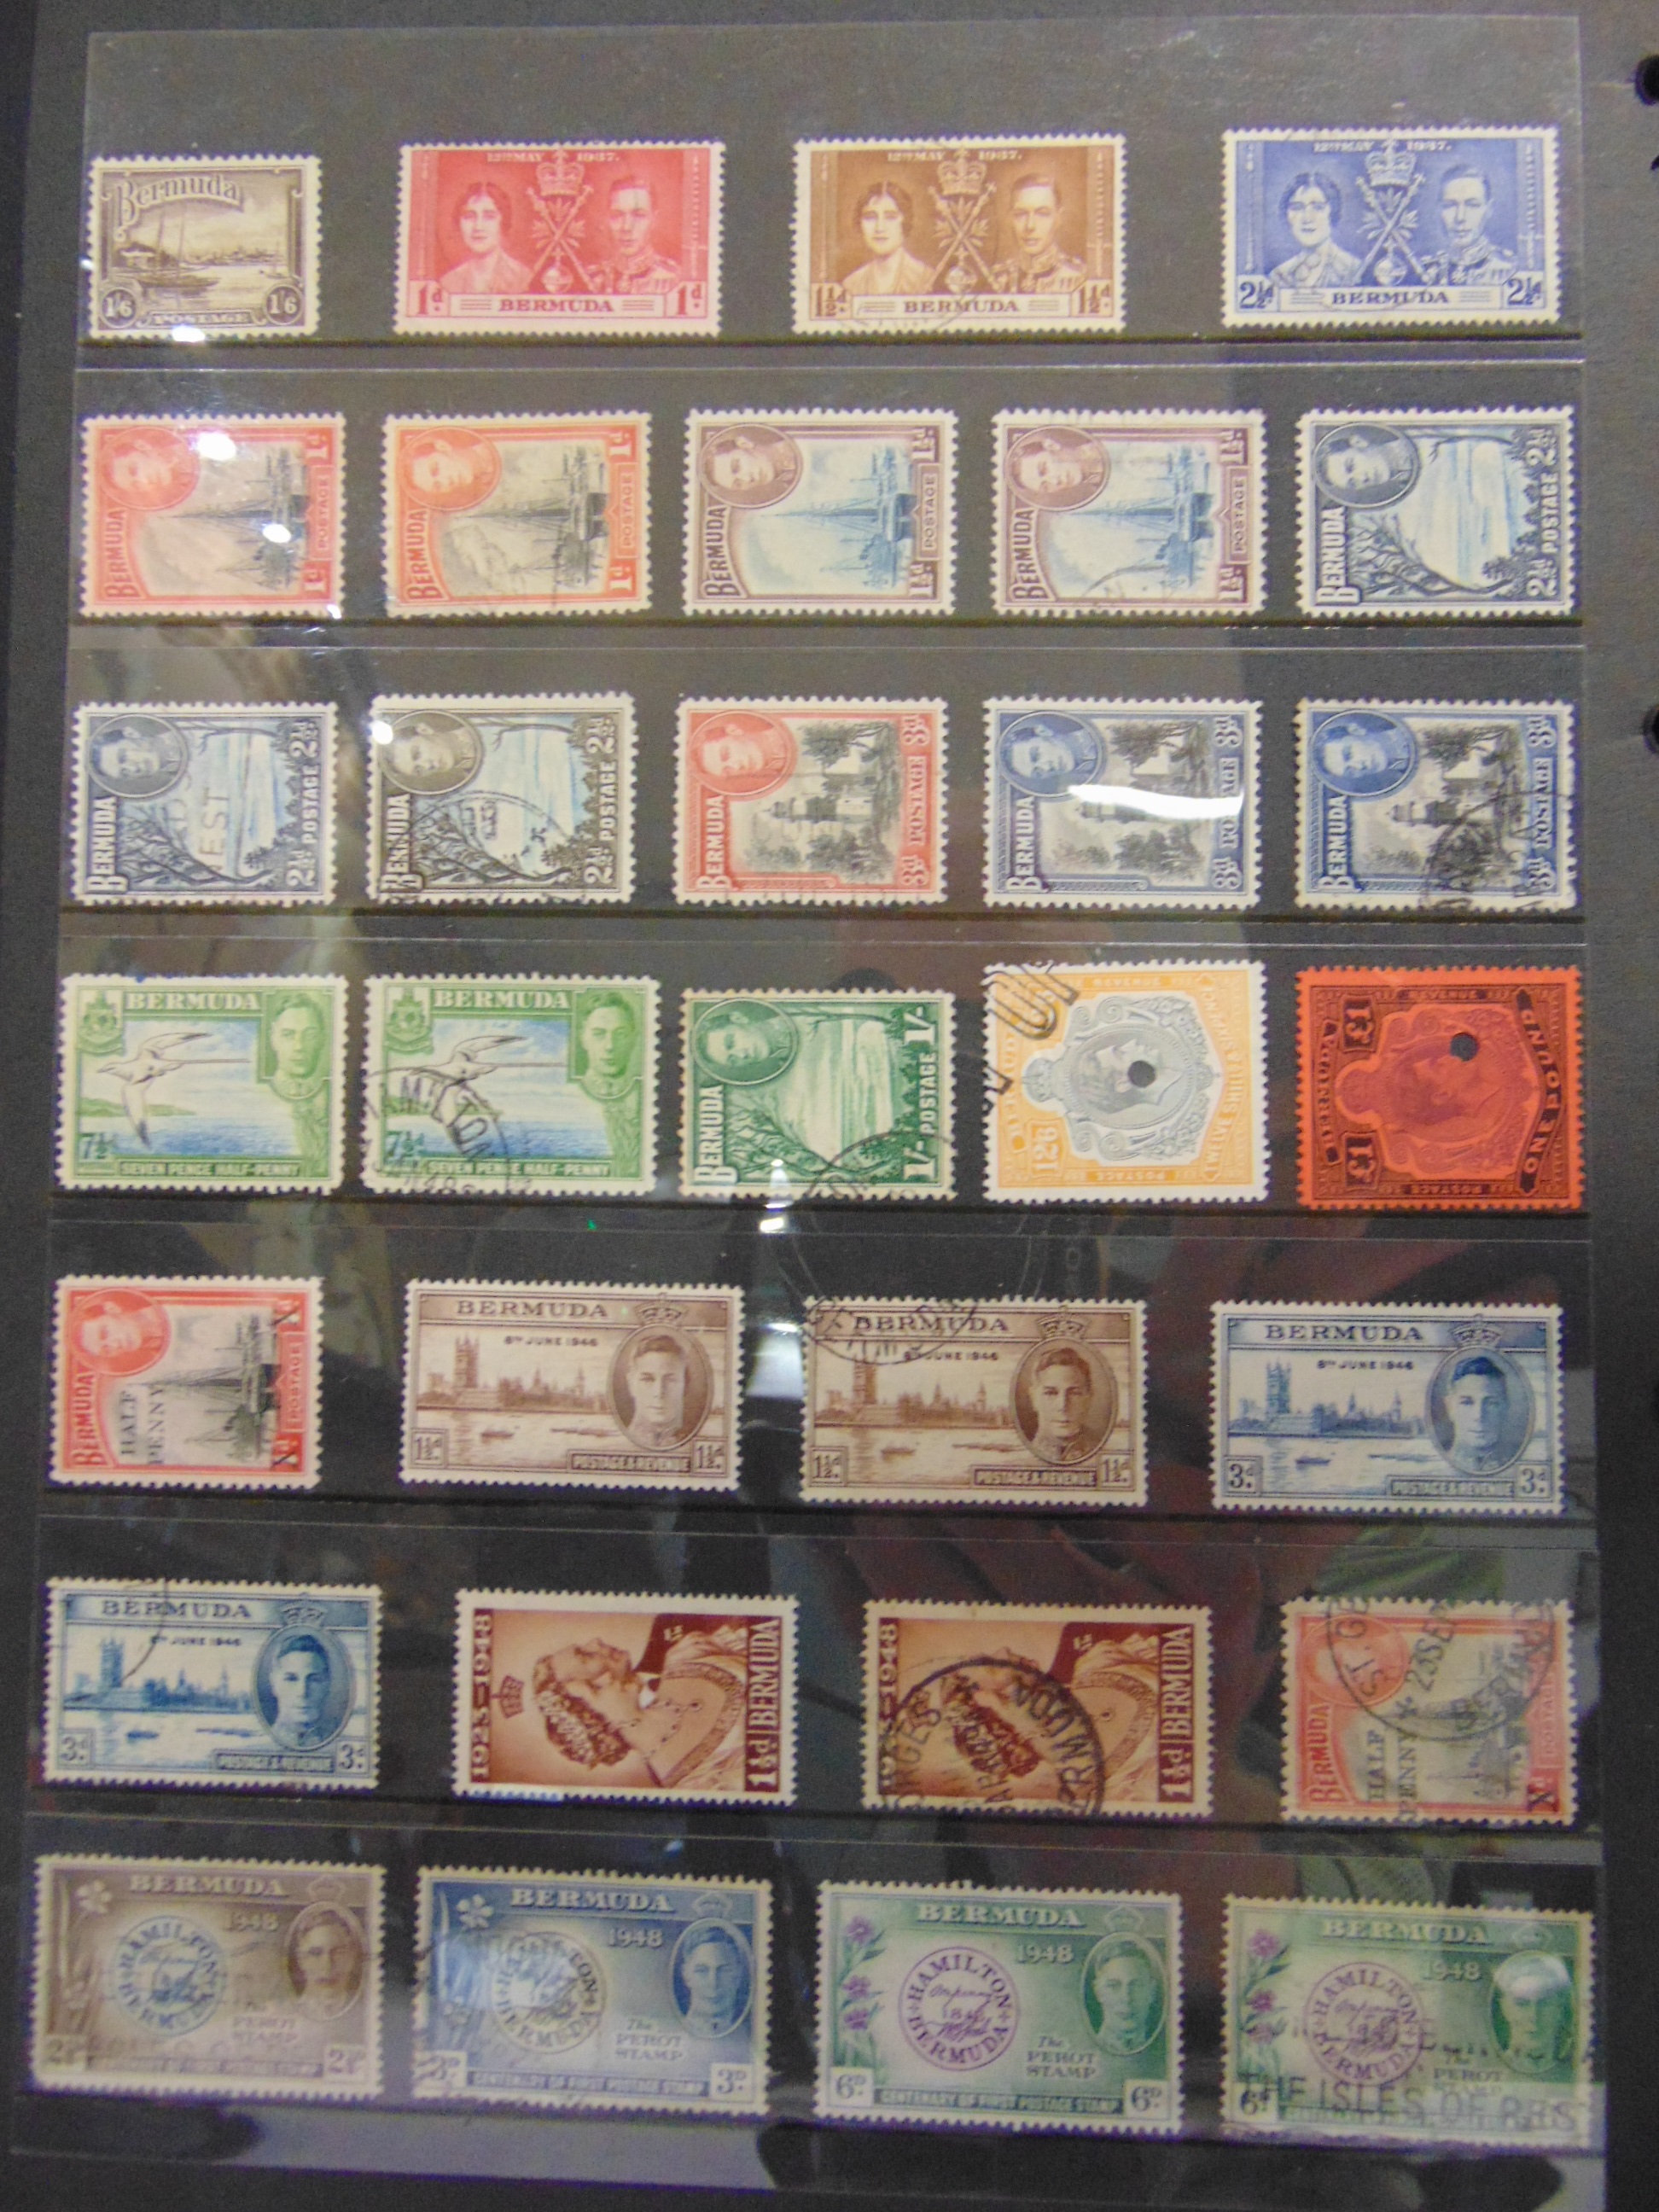 STAMPS - A PART-WORLD COLLECTION including Antigua, Ascension, Bechuanaland, Botswana, Barbados, - Image 7 of 8